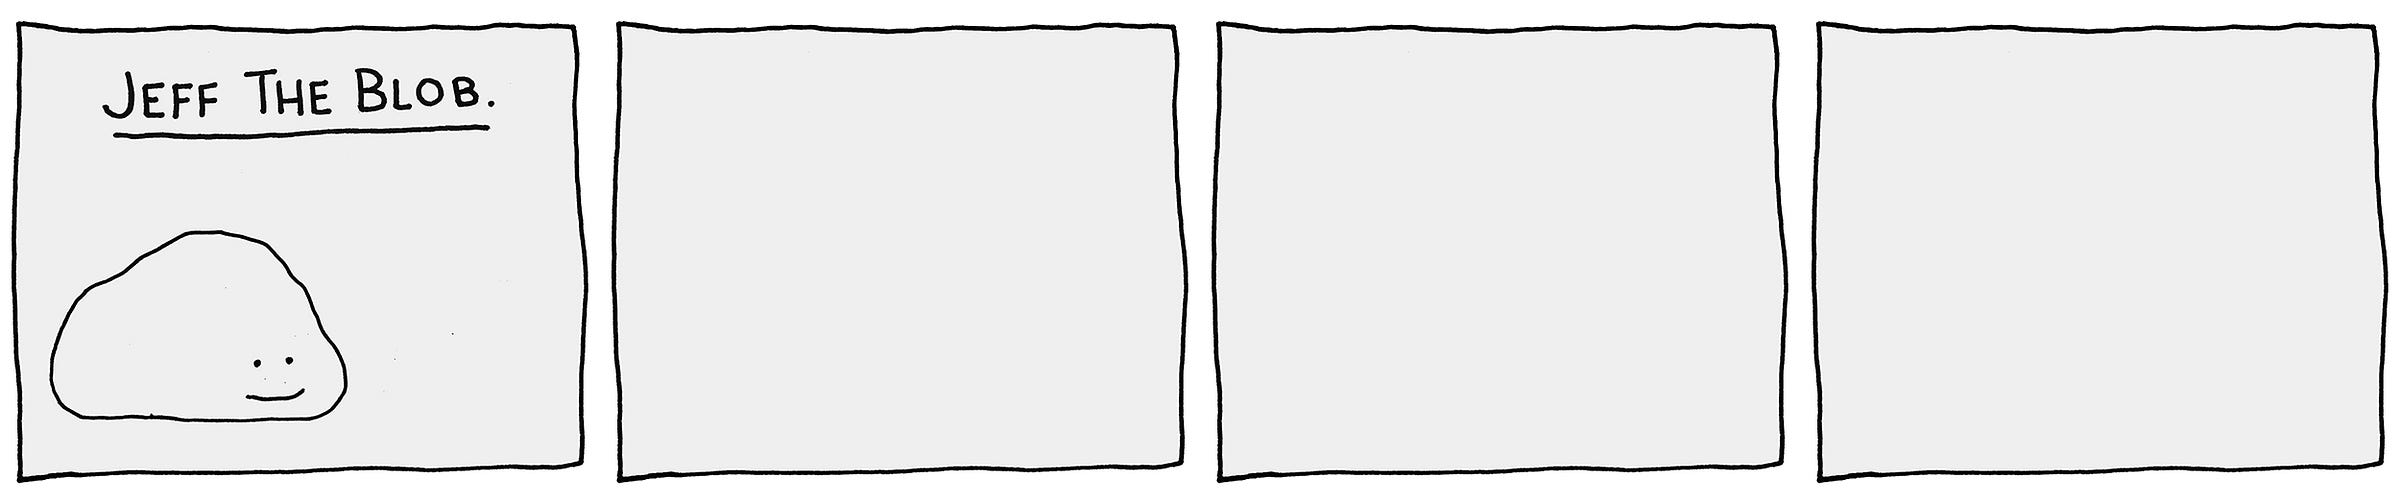 How to draw comics when you can’t actually draw. – Chaz Hutton – Medium